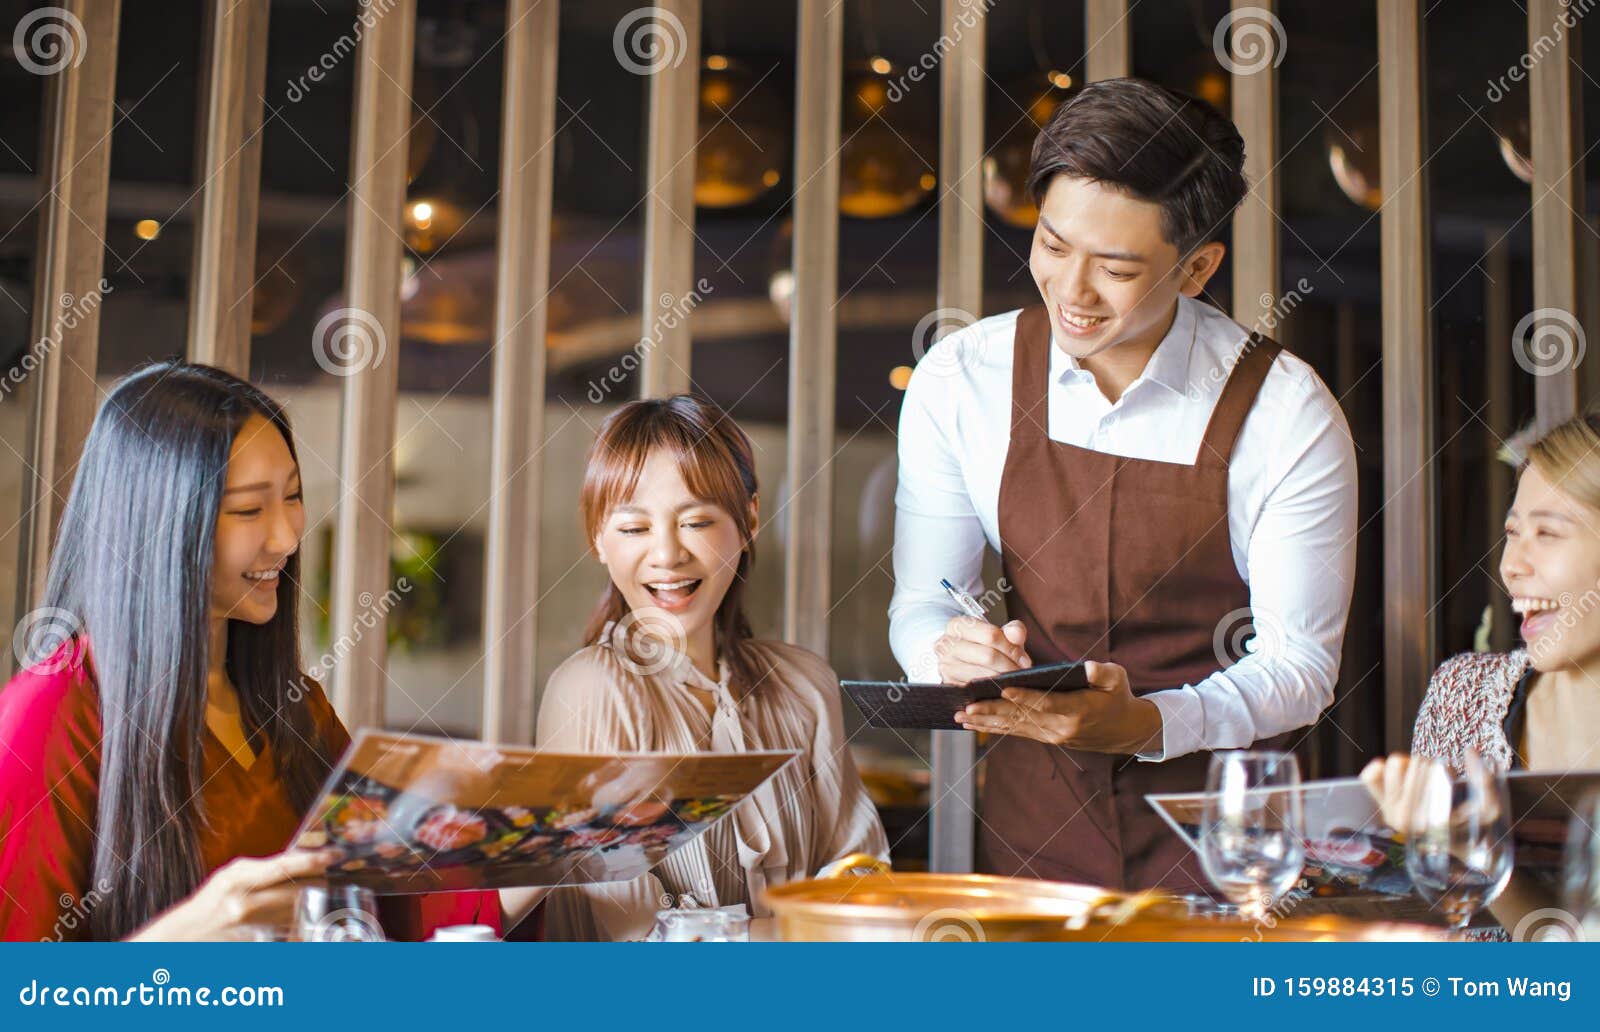 young waiter  taking an order  in hot pot reataurant